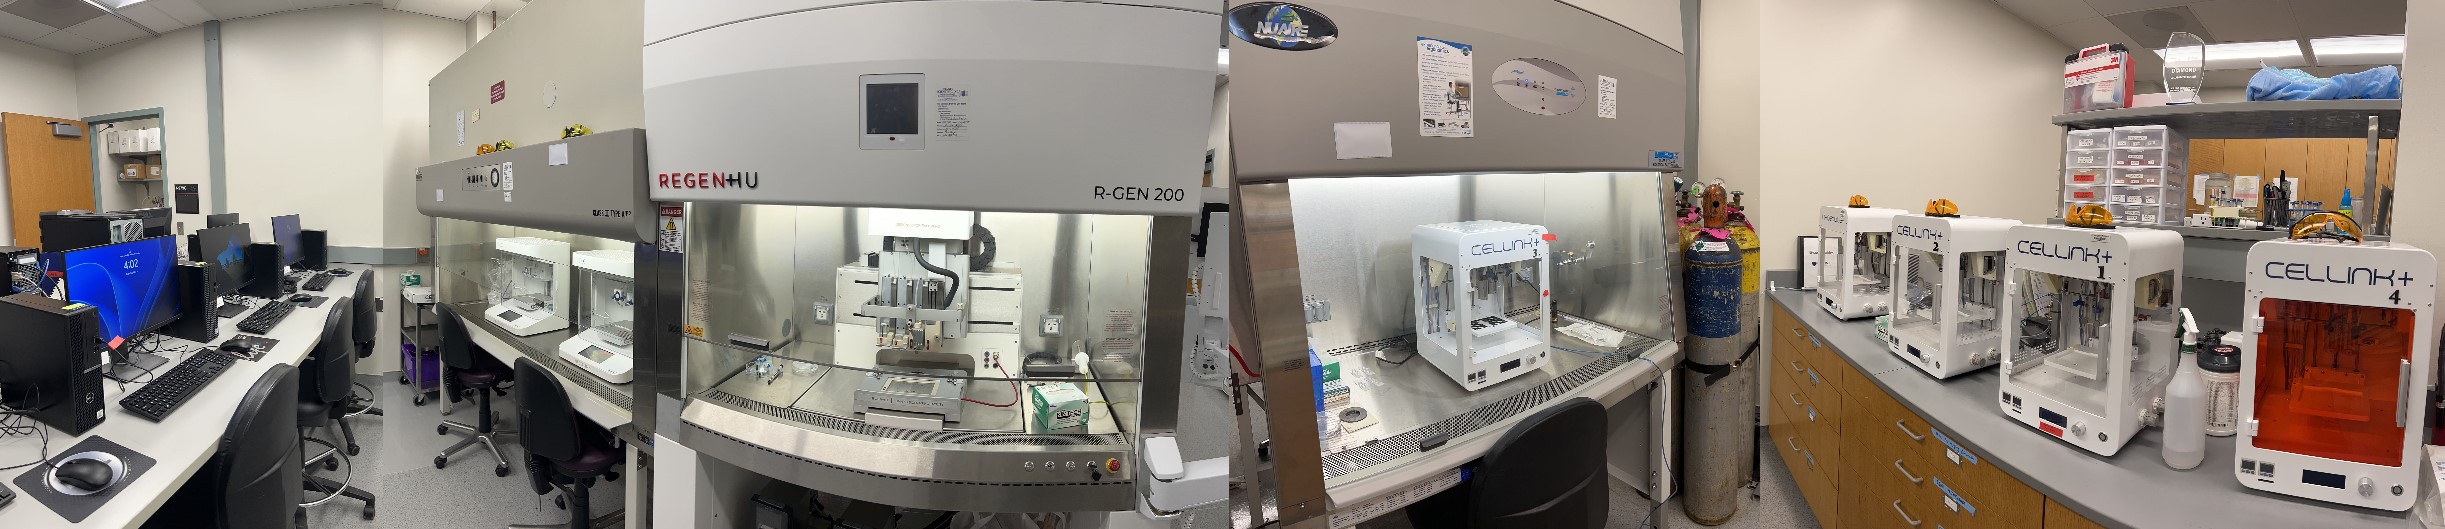 Panoramic view of the equipment in the 3D bioprinting facility